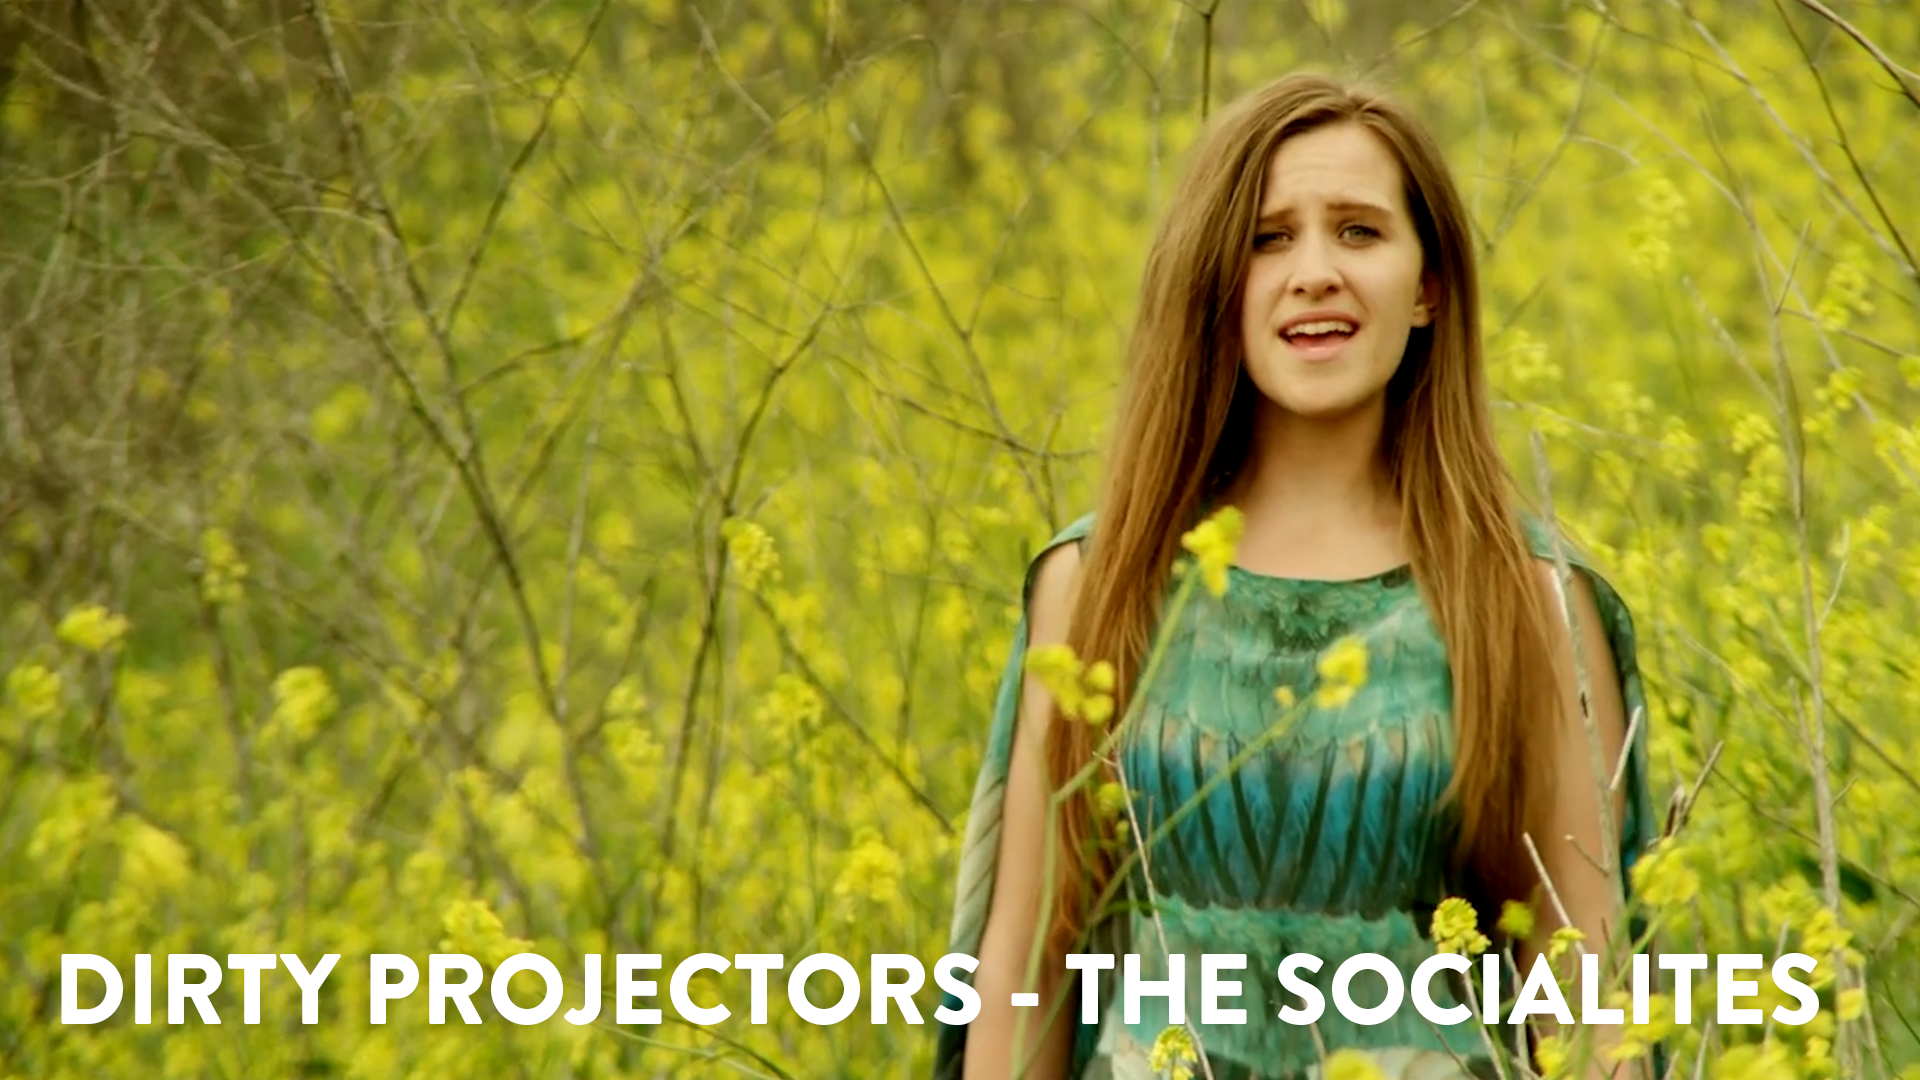 Dirty Projectors - The Socialites